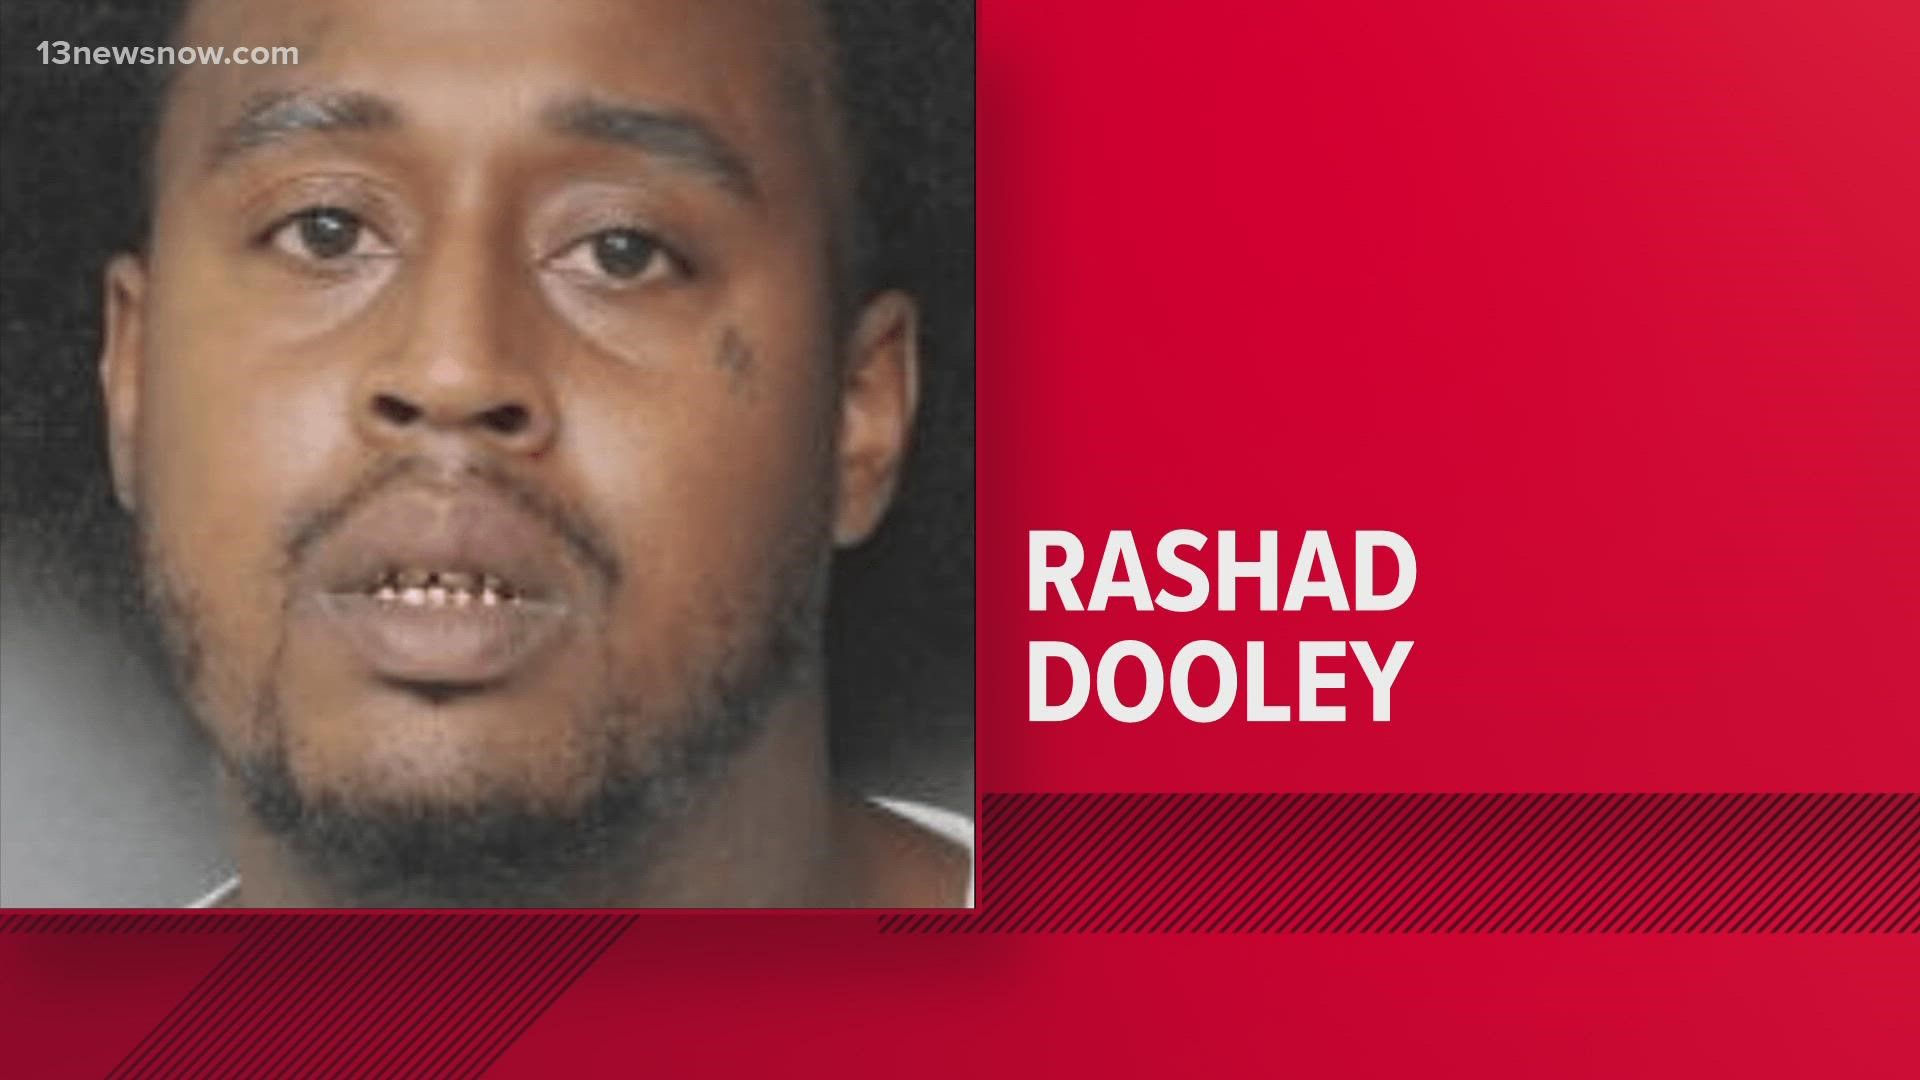 A man convicted on charges of conspiring to kill an ODU student in 2011 was taken into custody after more than two weeks on the run, Norfolk police said.